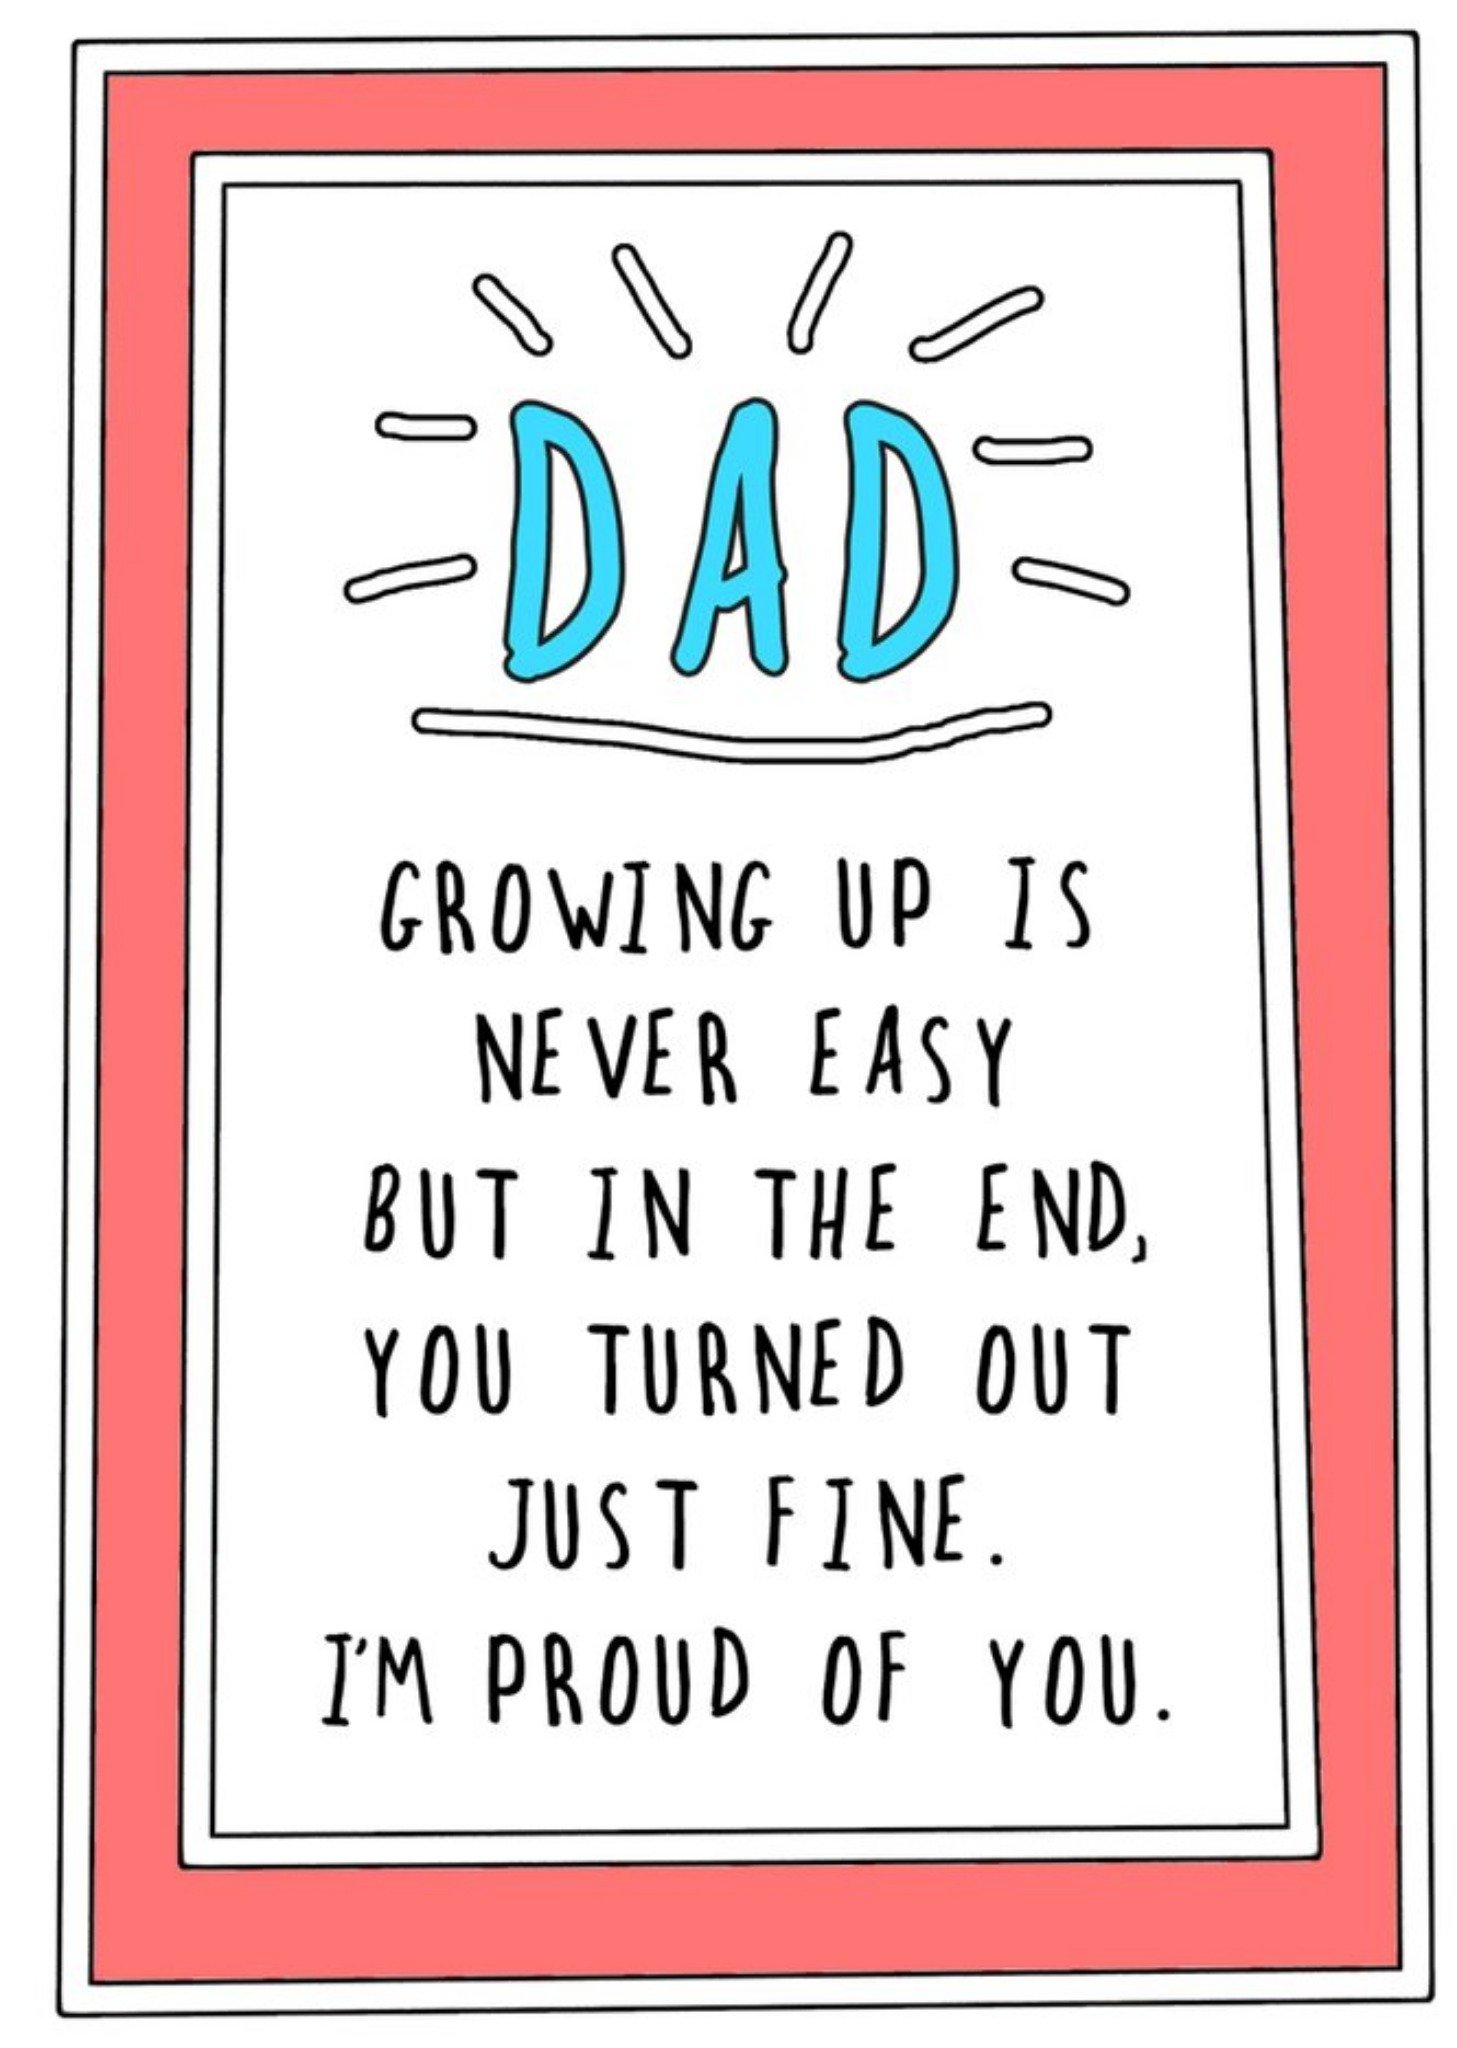 Go La La Funny Cheeky Dad Growing Up Is Never Easy But You Turned Out Fine Proud Of You Card Ecard